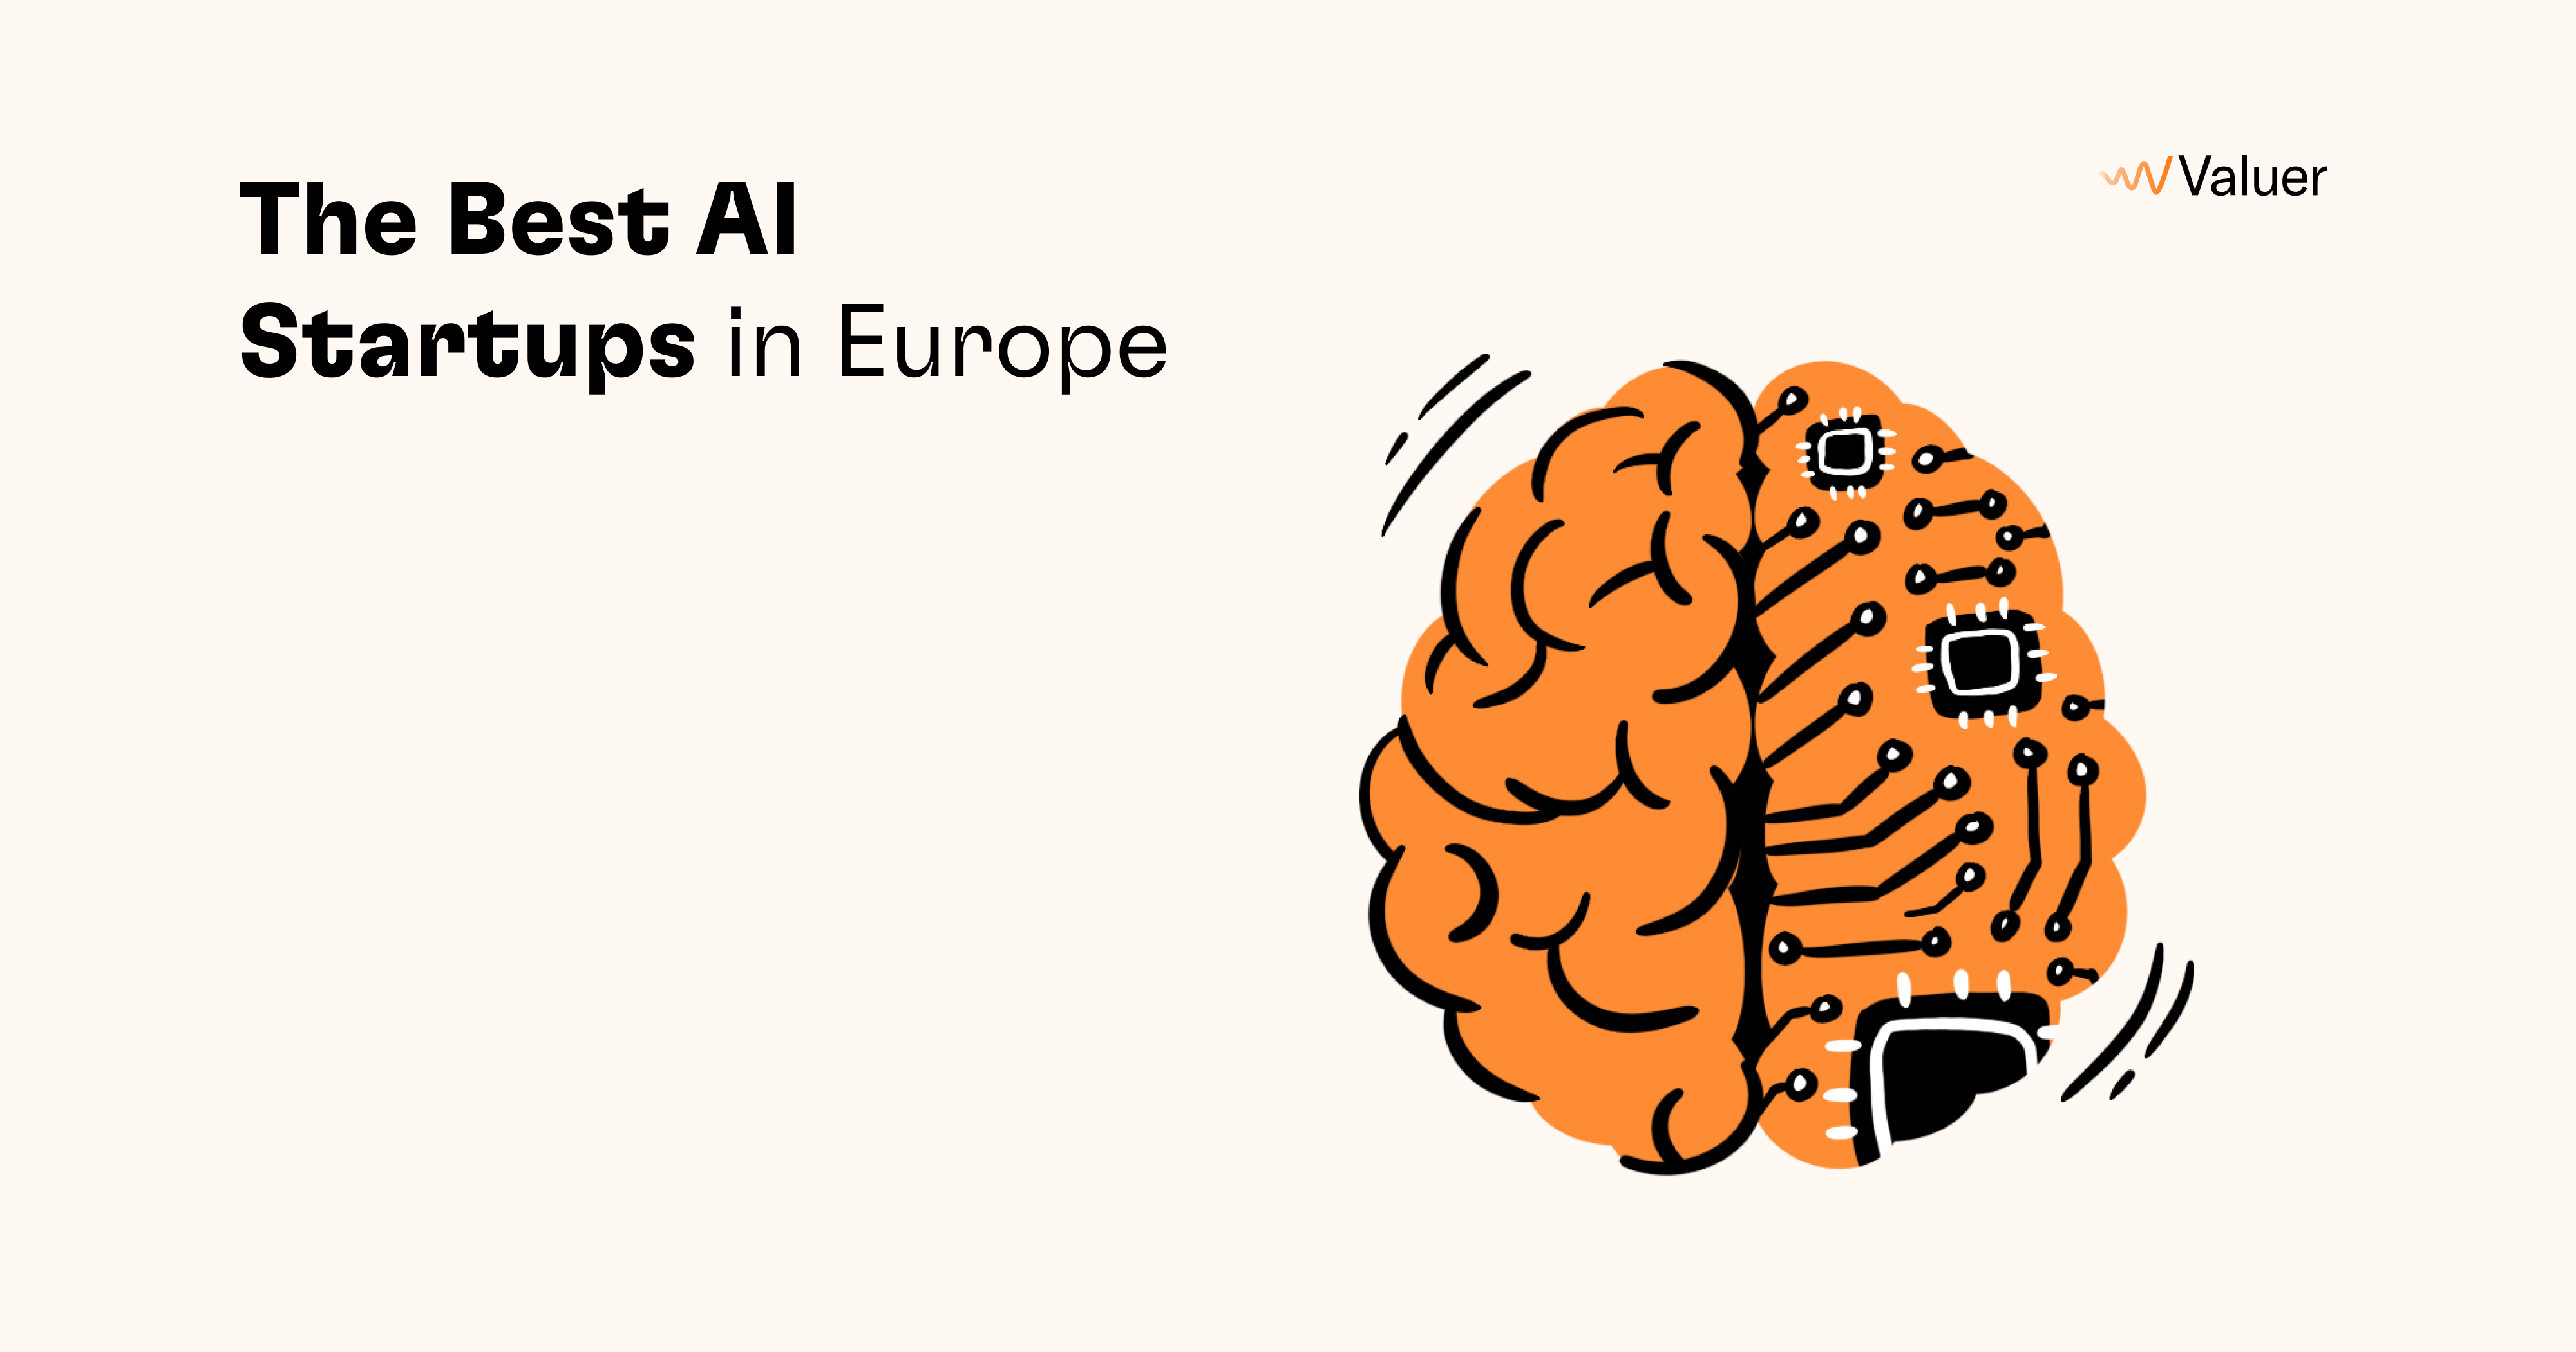 The Best AI Startups in Europe